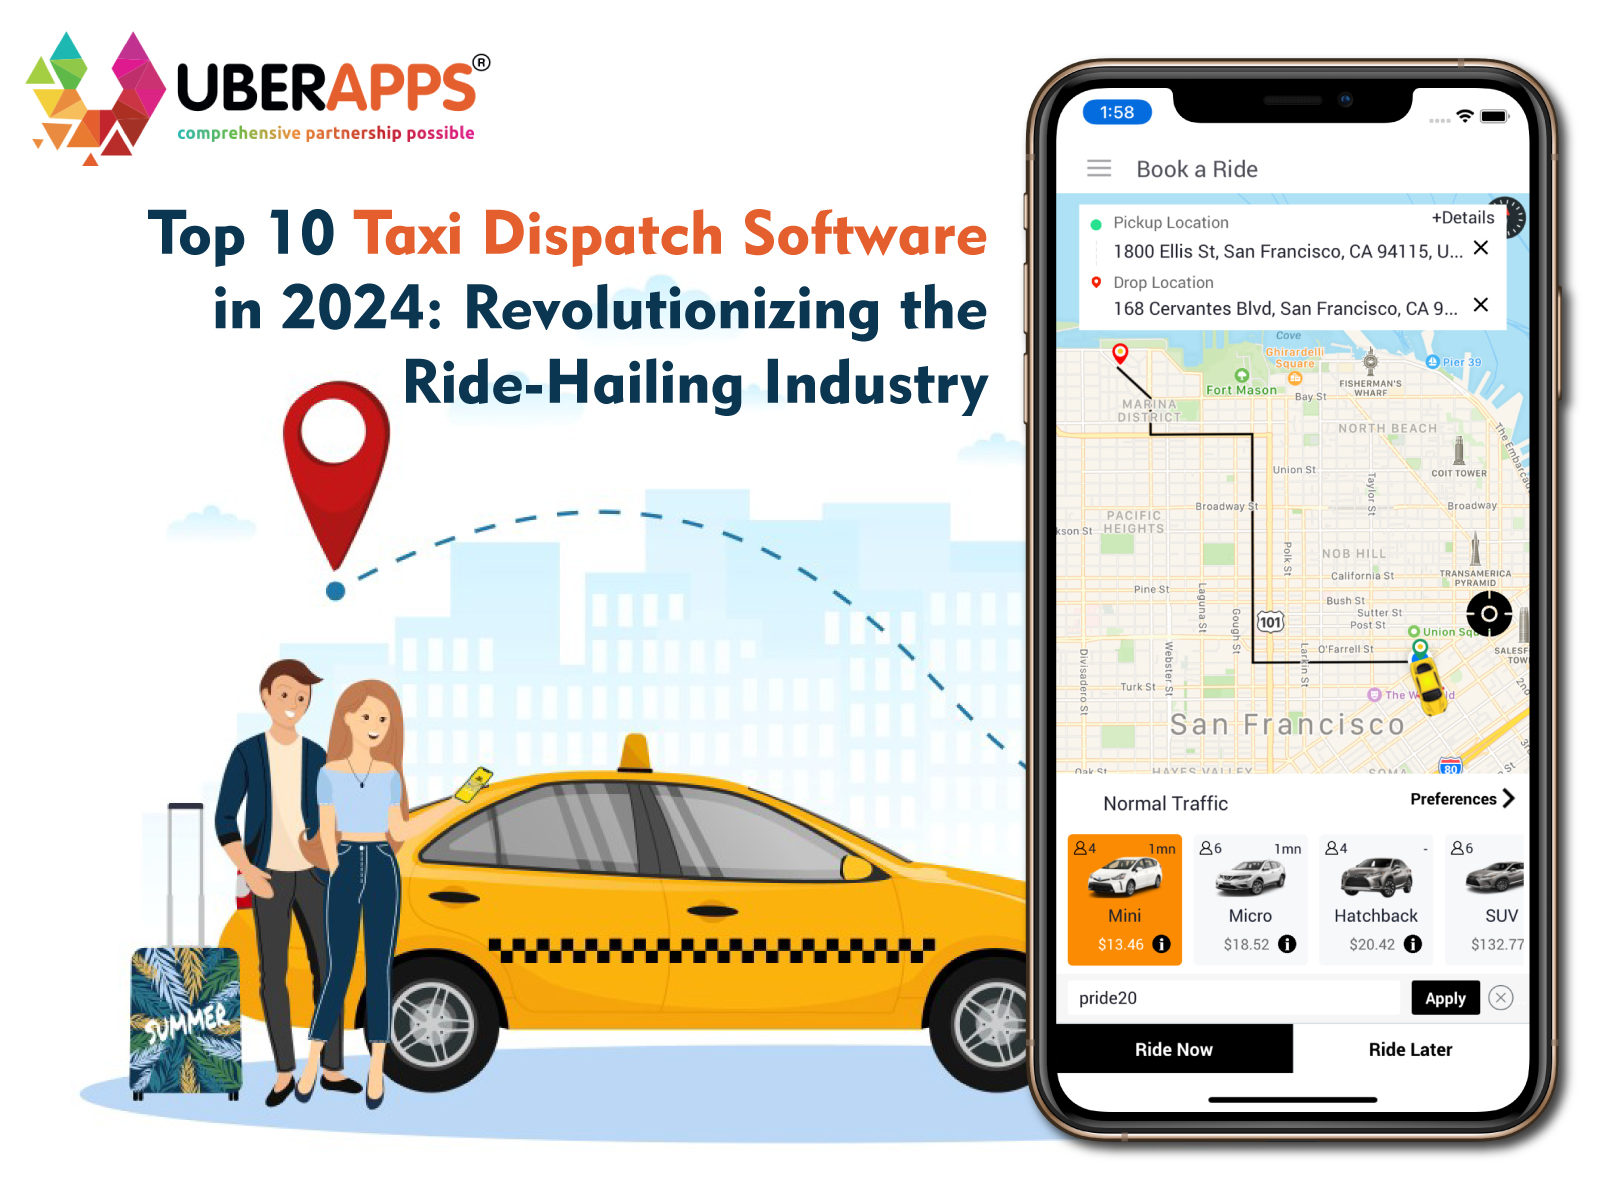 Top 10 Taxi Dispatch Software: Revolutionizing the Ride-Hailing Industry